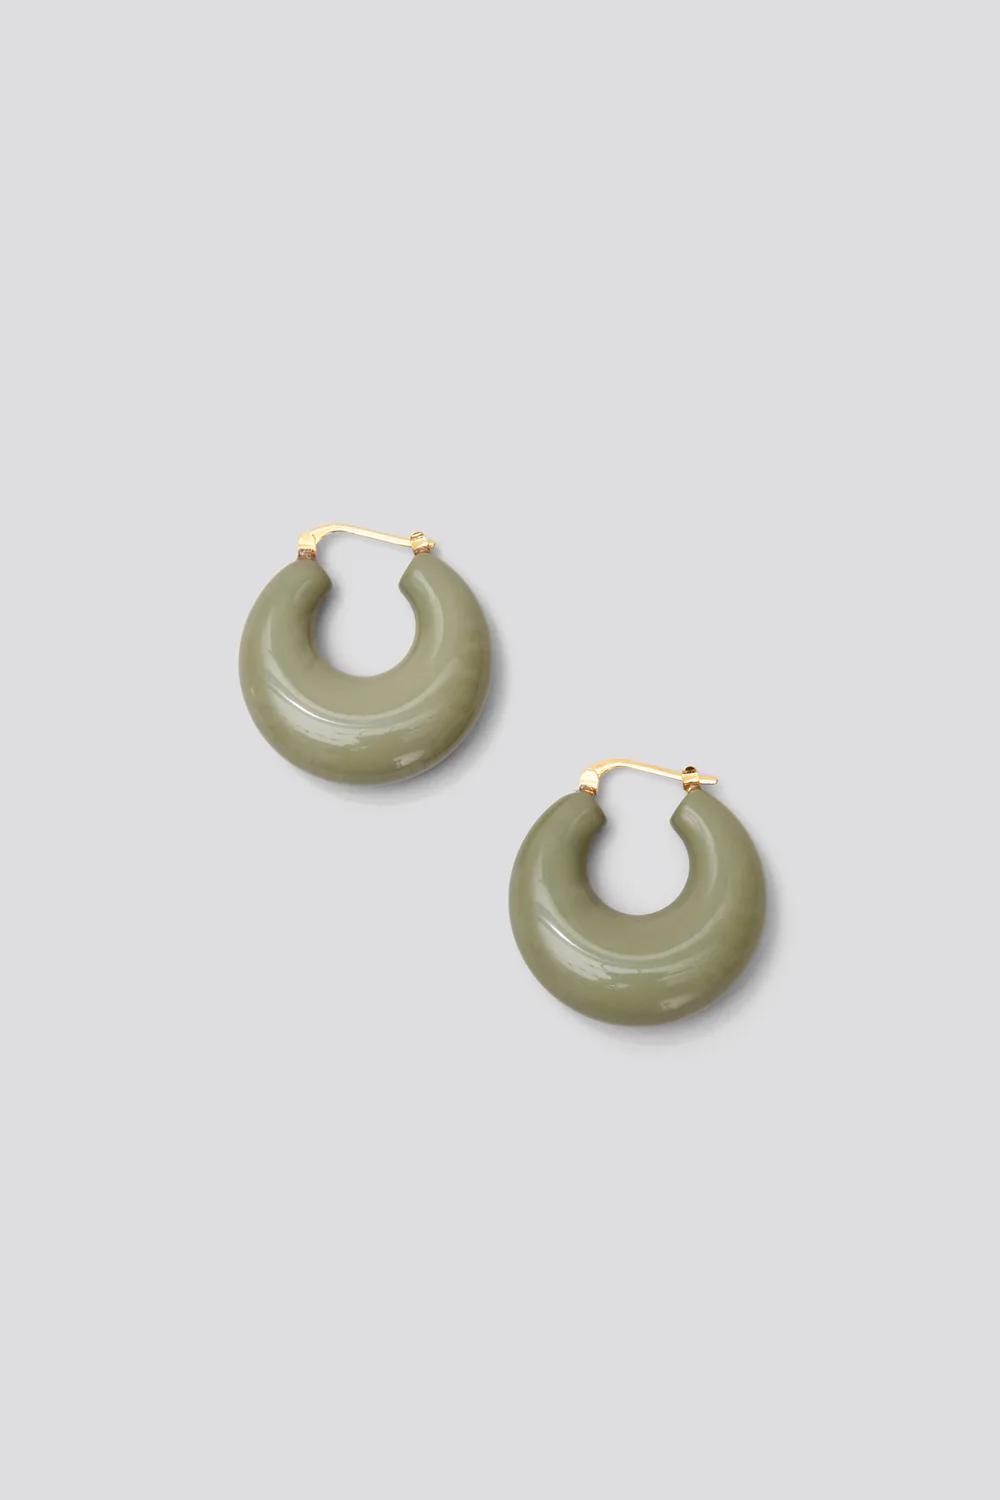 Product Image for Grass Earrings, Olive